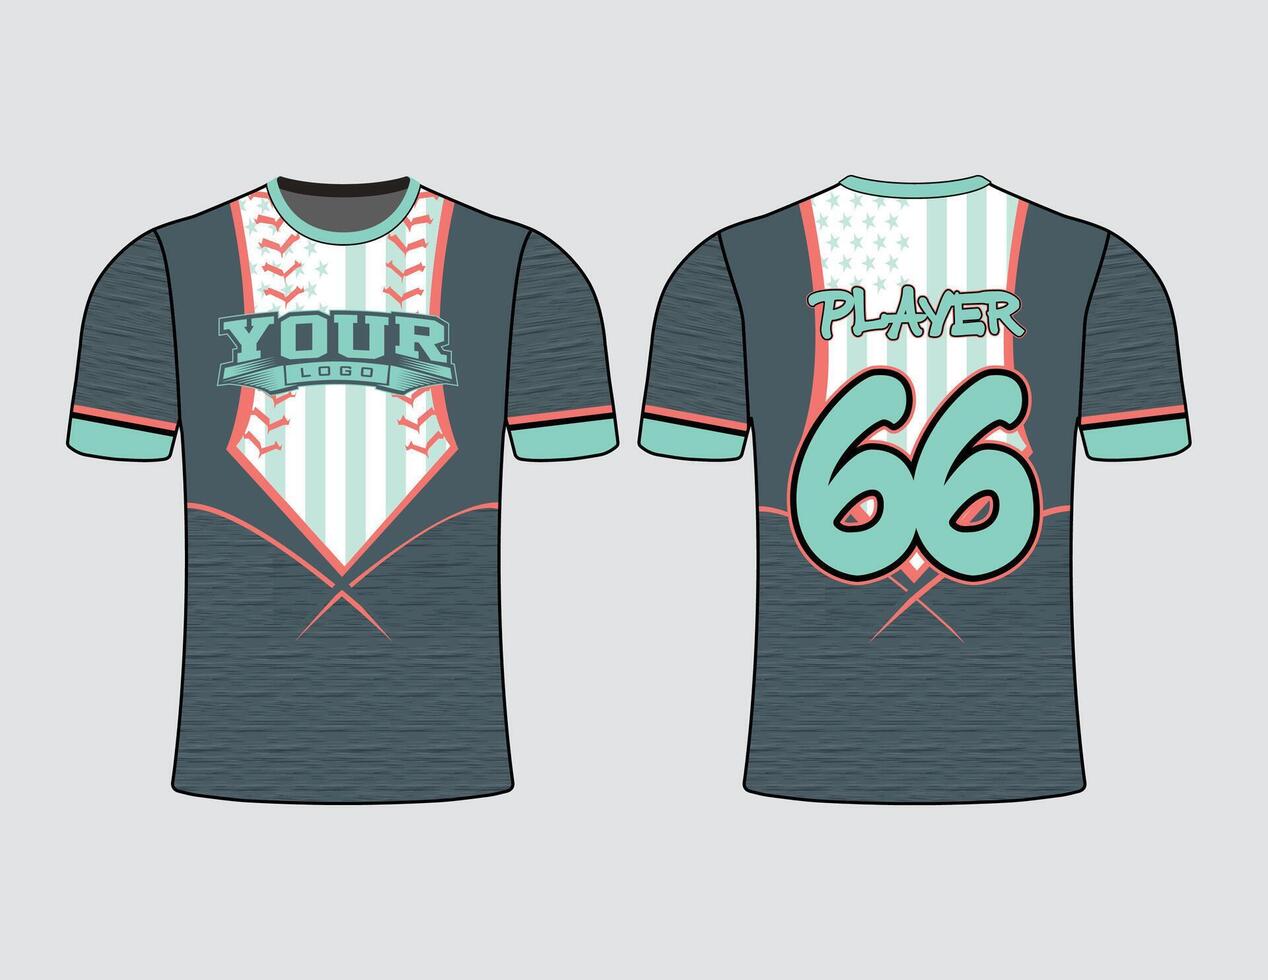 All sports team jersey design with an elegant edgy and wild look for all your casual, fashion and sportswear vector